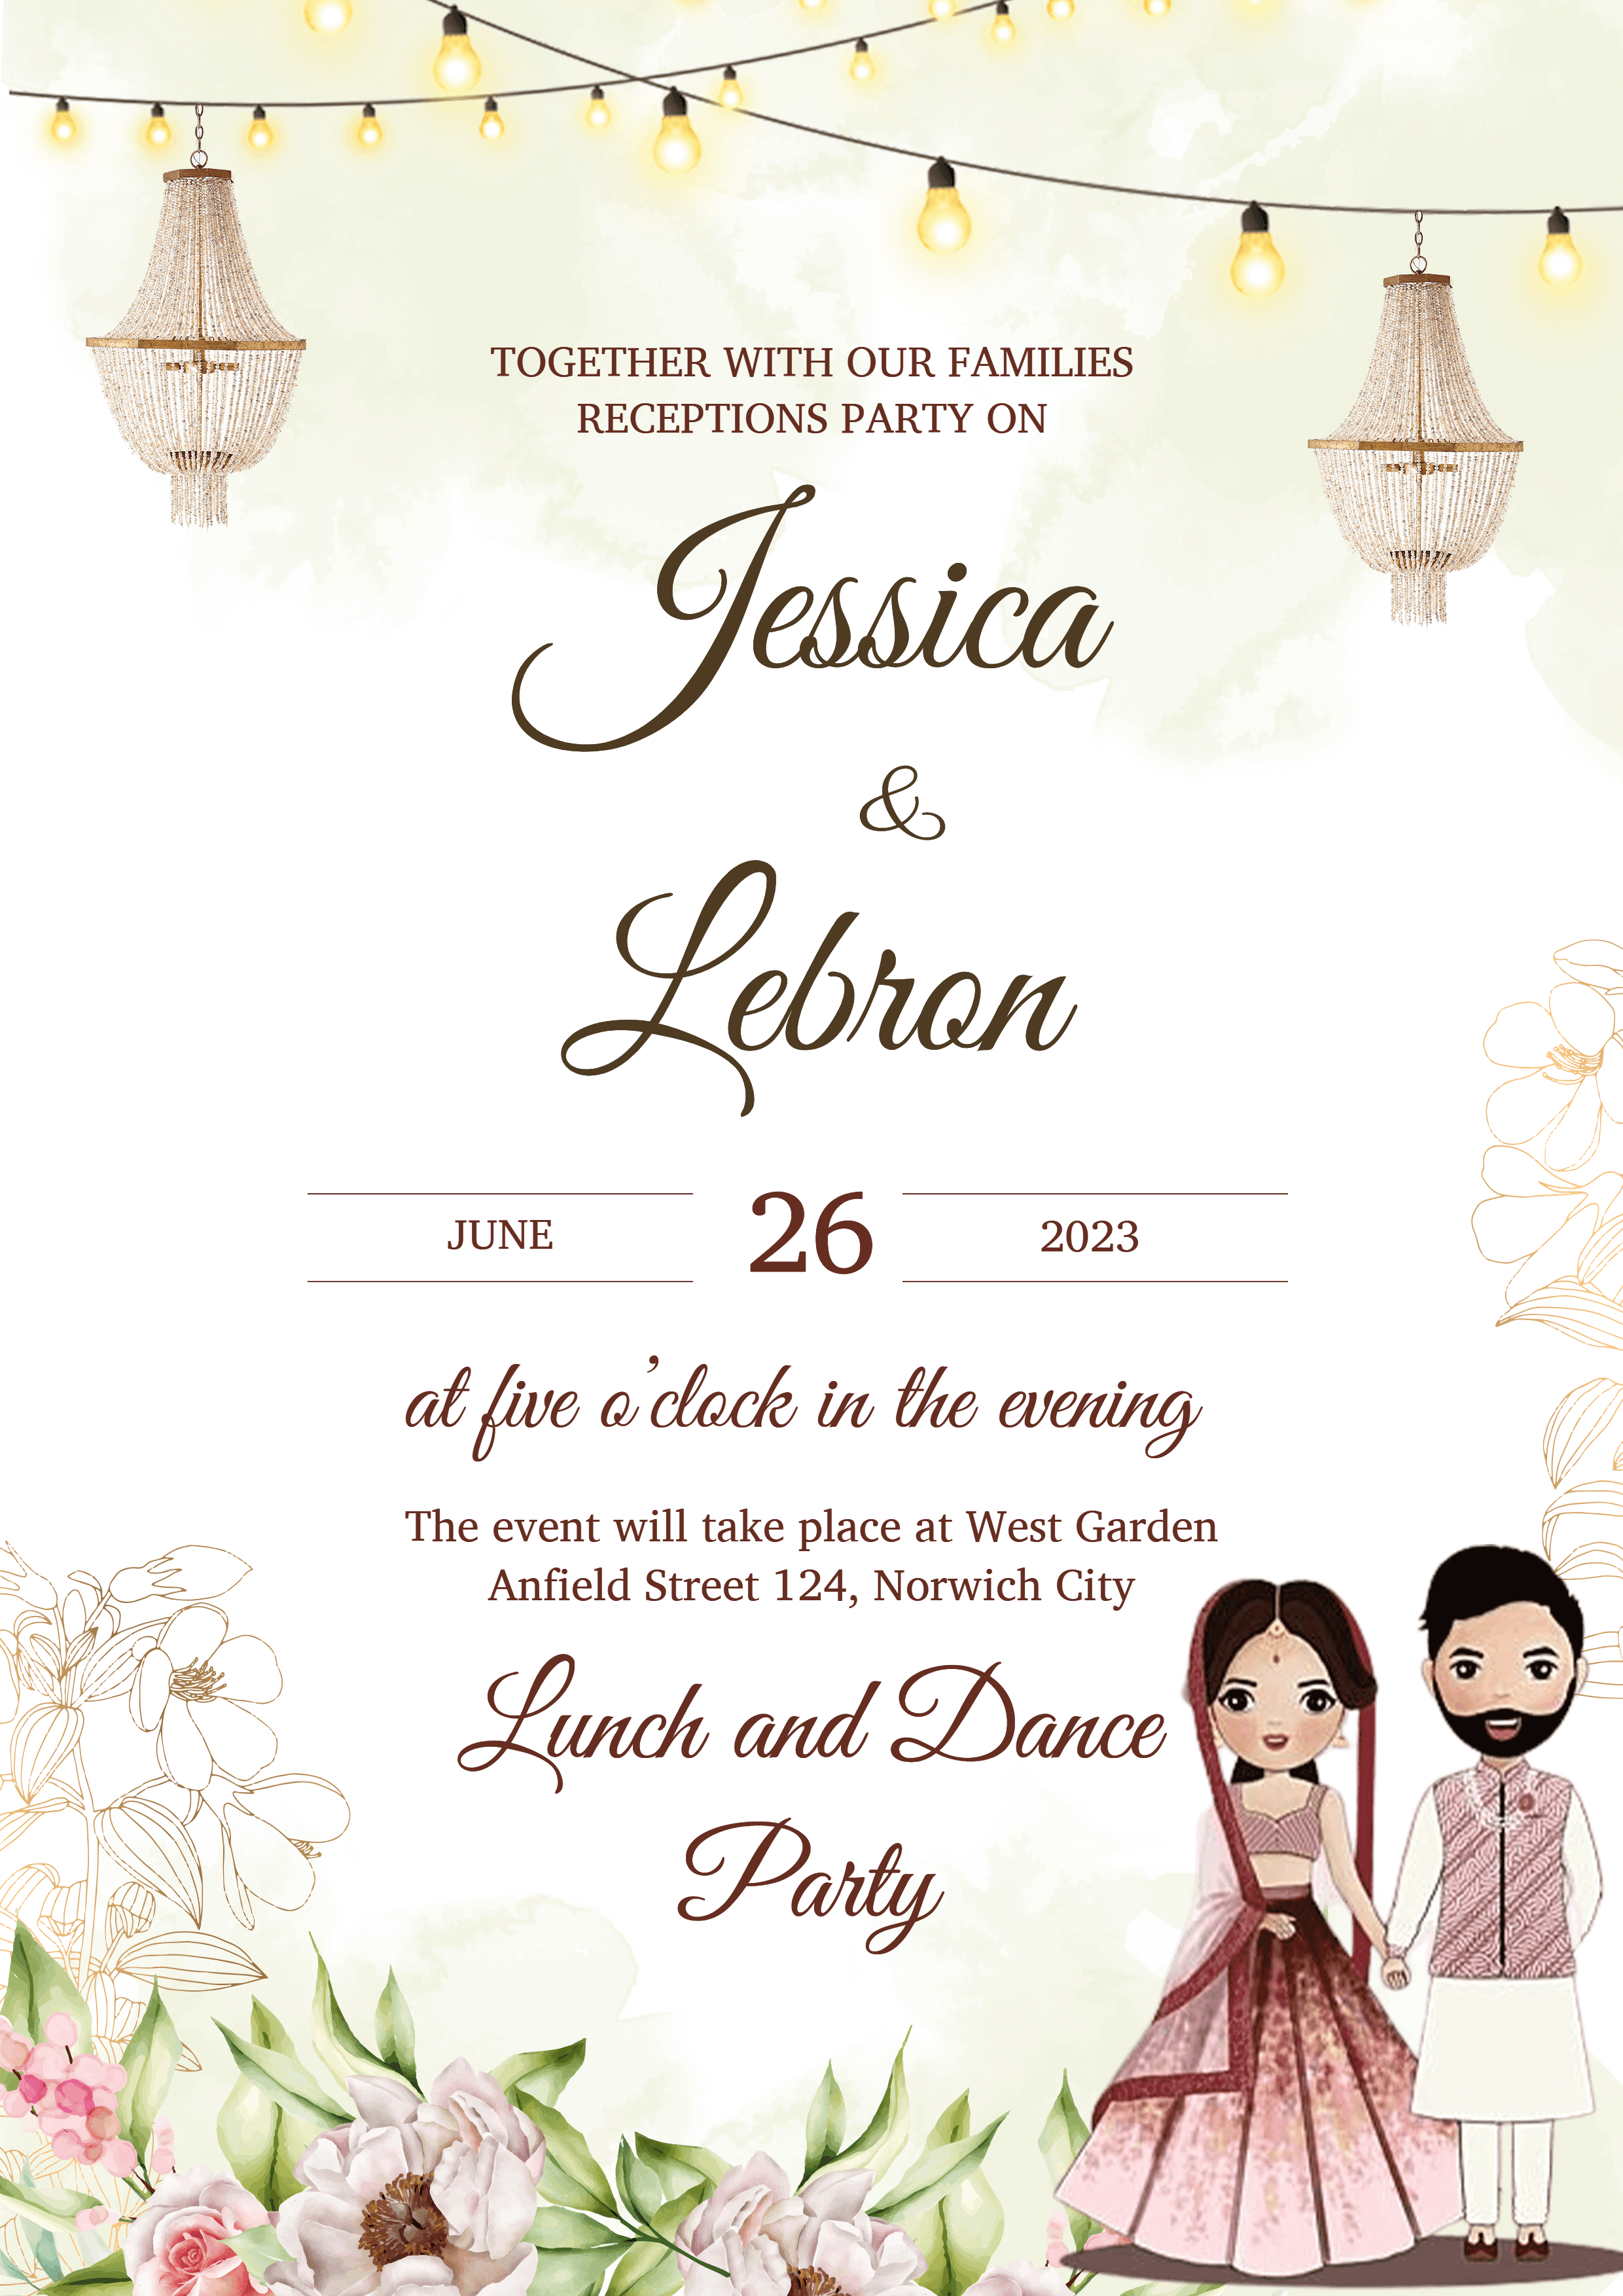 Download New Reception Party Invitation Card